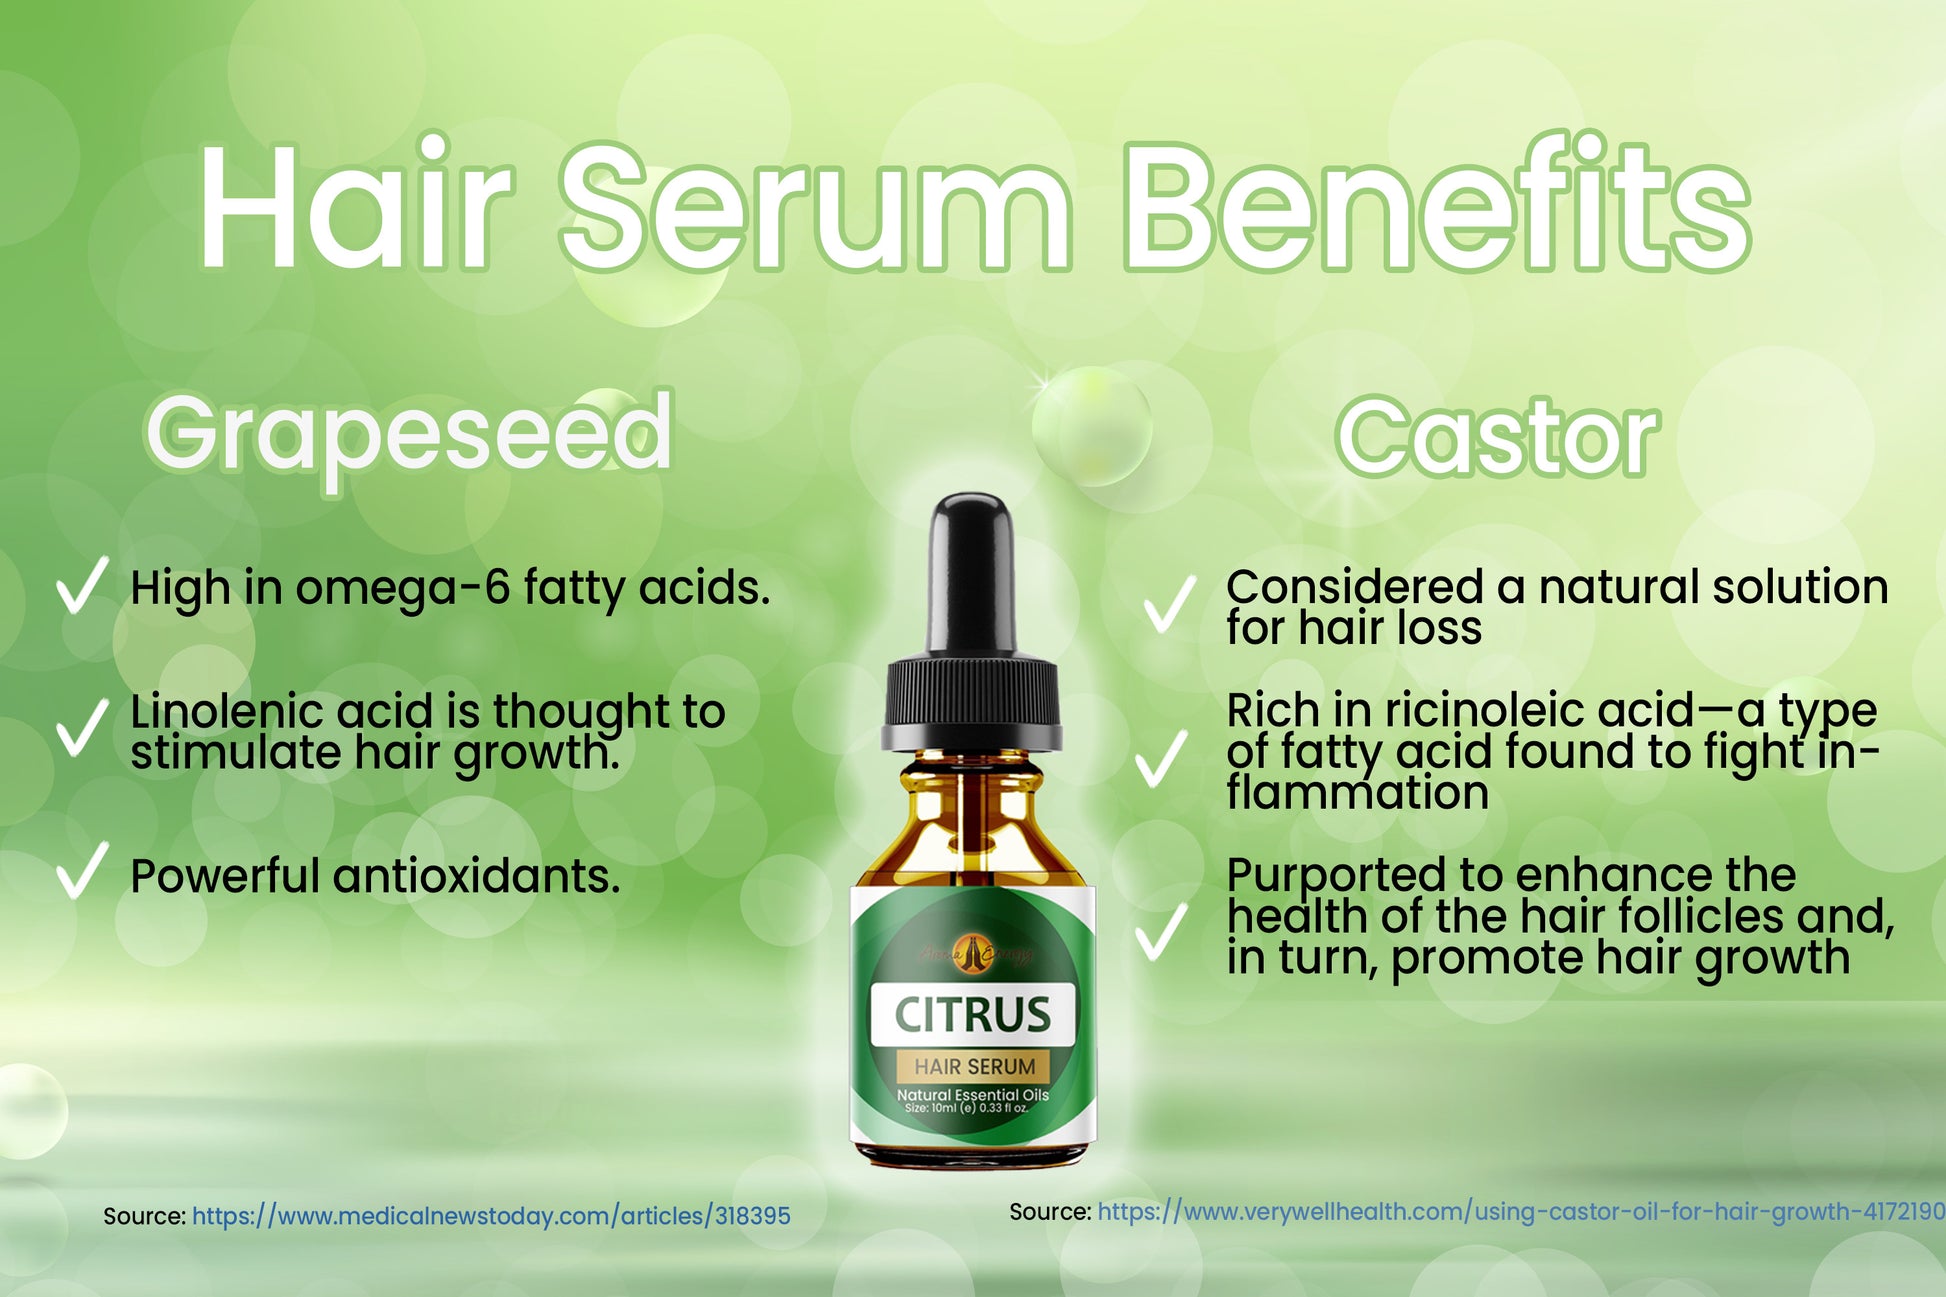 Essential Oil Hair Serum - Floral - Contains Natural Lavender, Castor and Vitamin E Oils - Aroma Energy